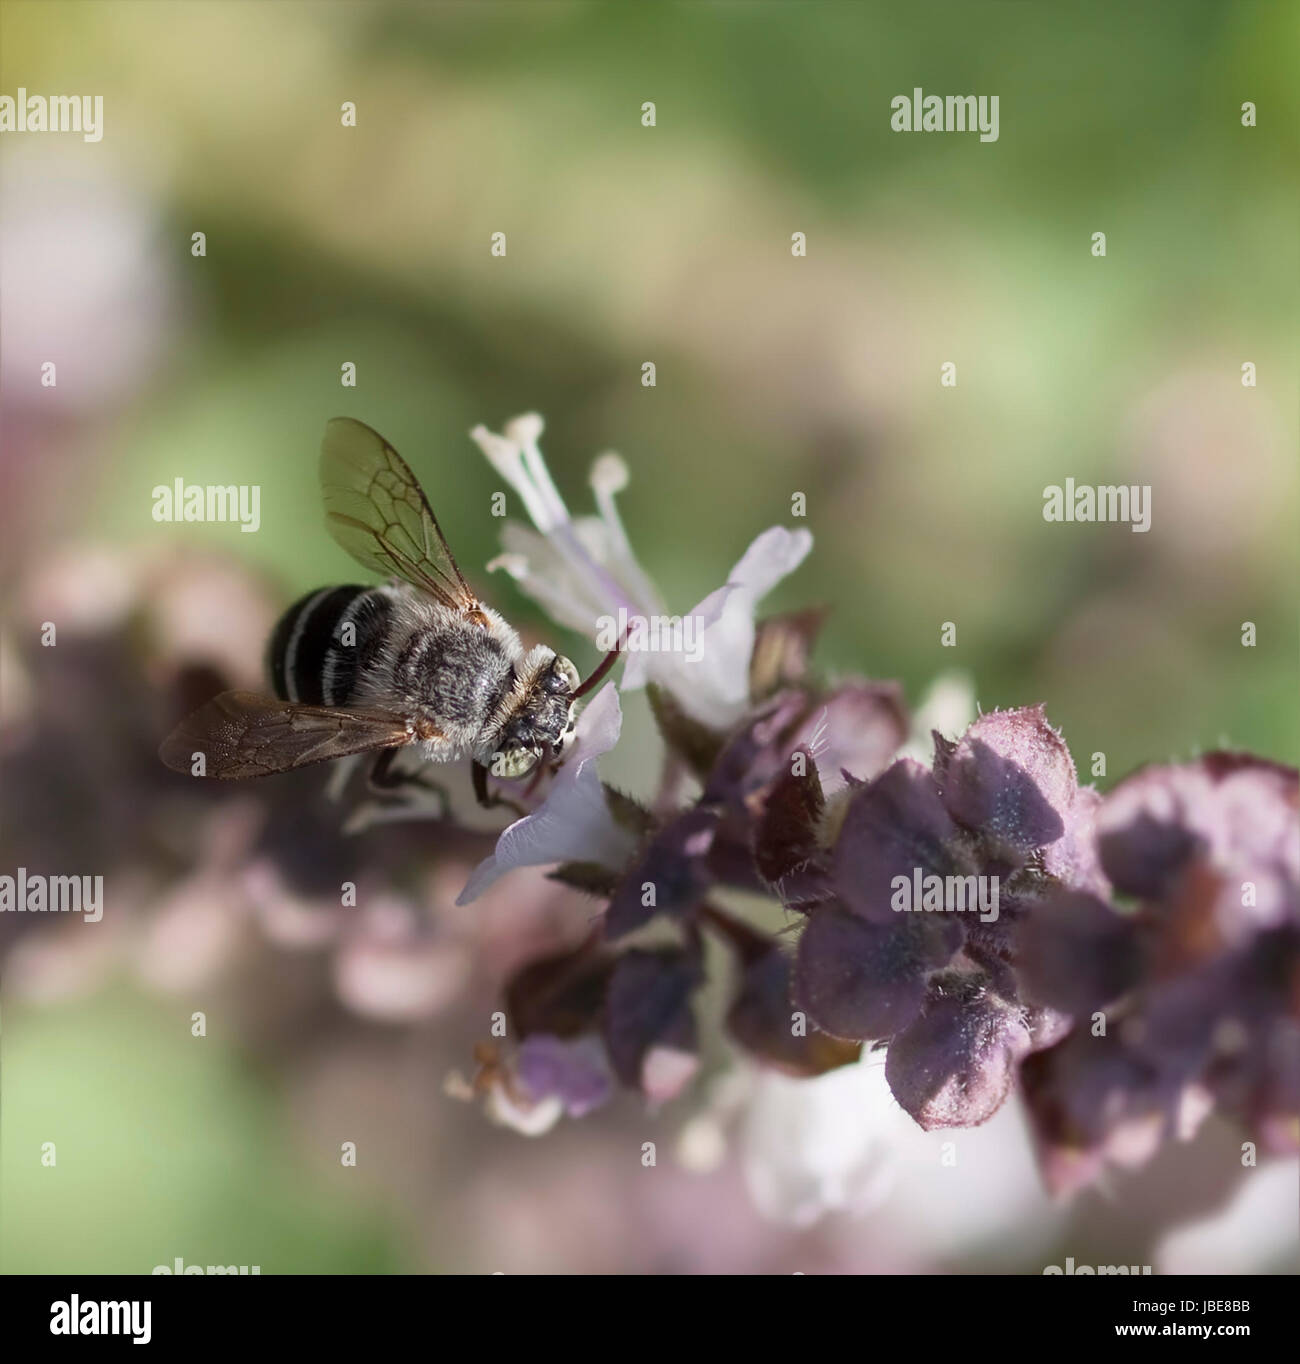 Australian native Blue Banded Bee  variety  displaying white bands on abdomen Stock Photo